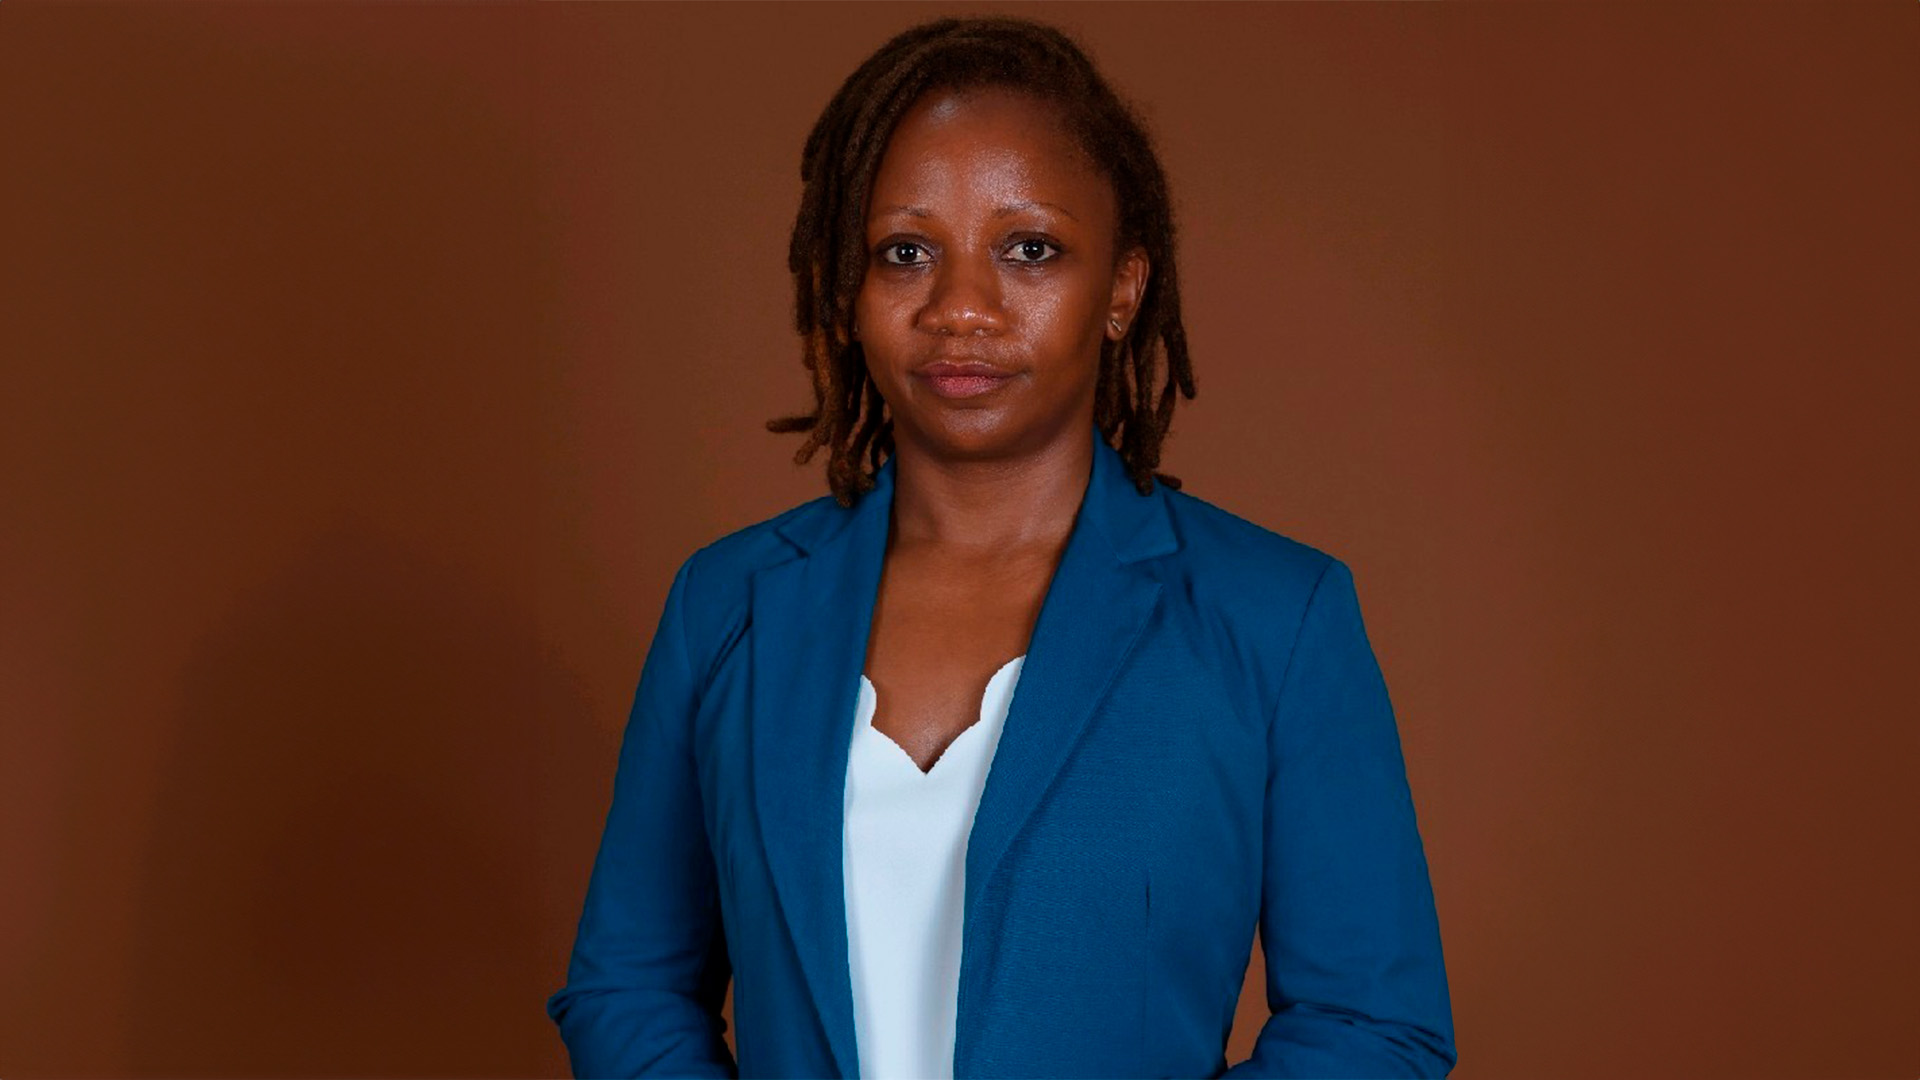 Elsa Tchicanha, to break stereotypes in the world of advocacy and two businesses in Angola